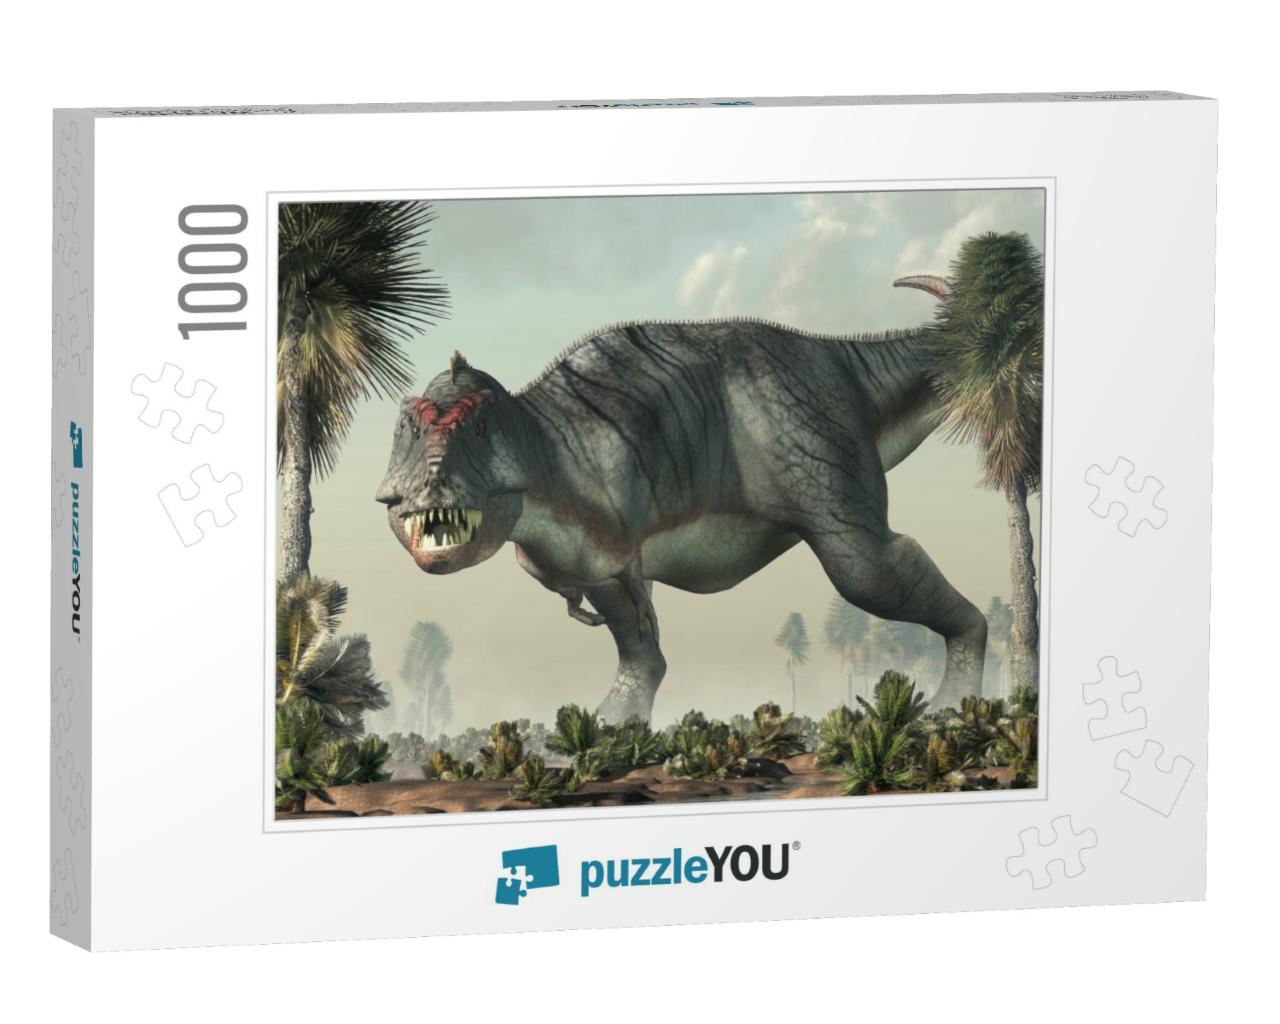 A Gray Tyrannosaurus Rex Stands in a Prehistoric Wetland... Jigsaw Puzzle with 1000 pieces